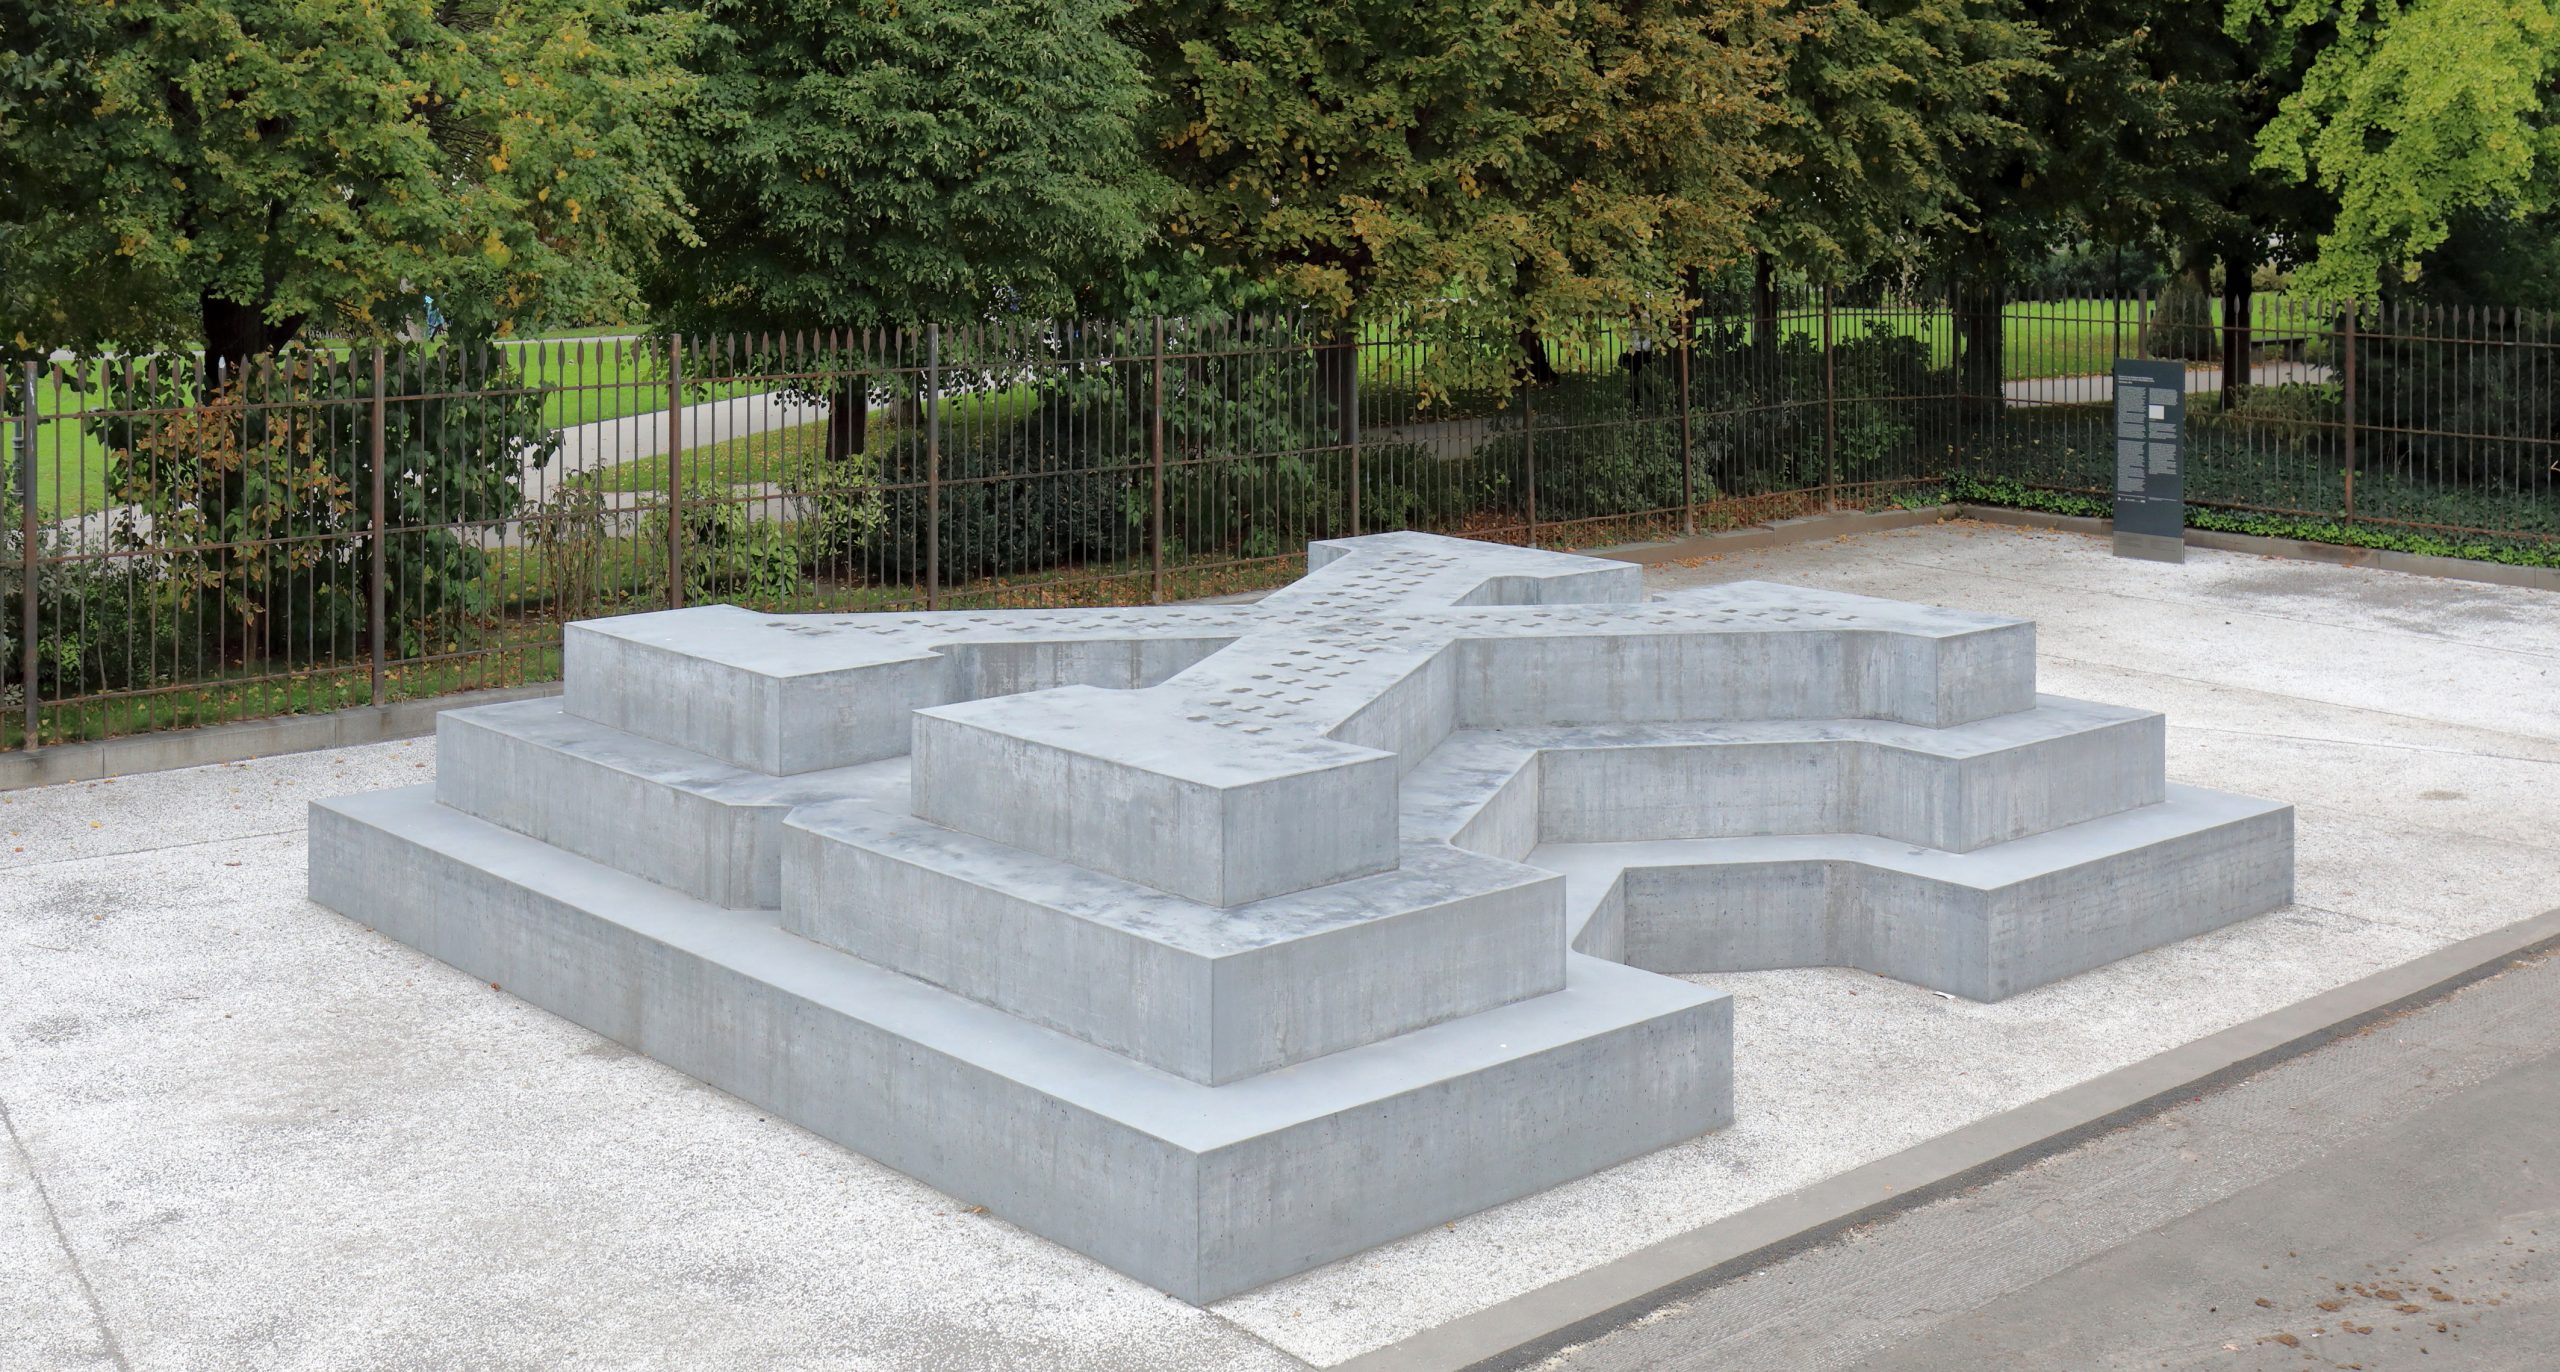 Memorial for the Victims of Nazi Military Justice, which look like grey steps that form that shape on an X